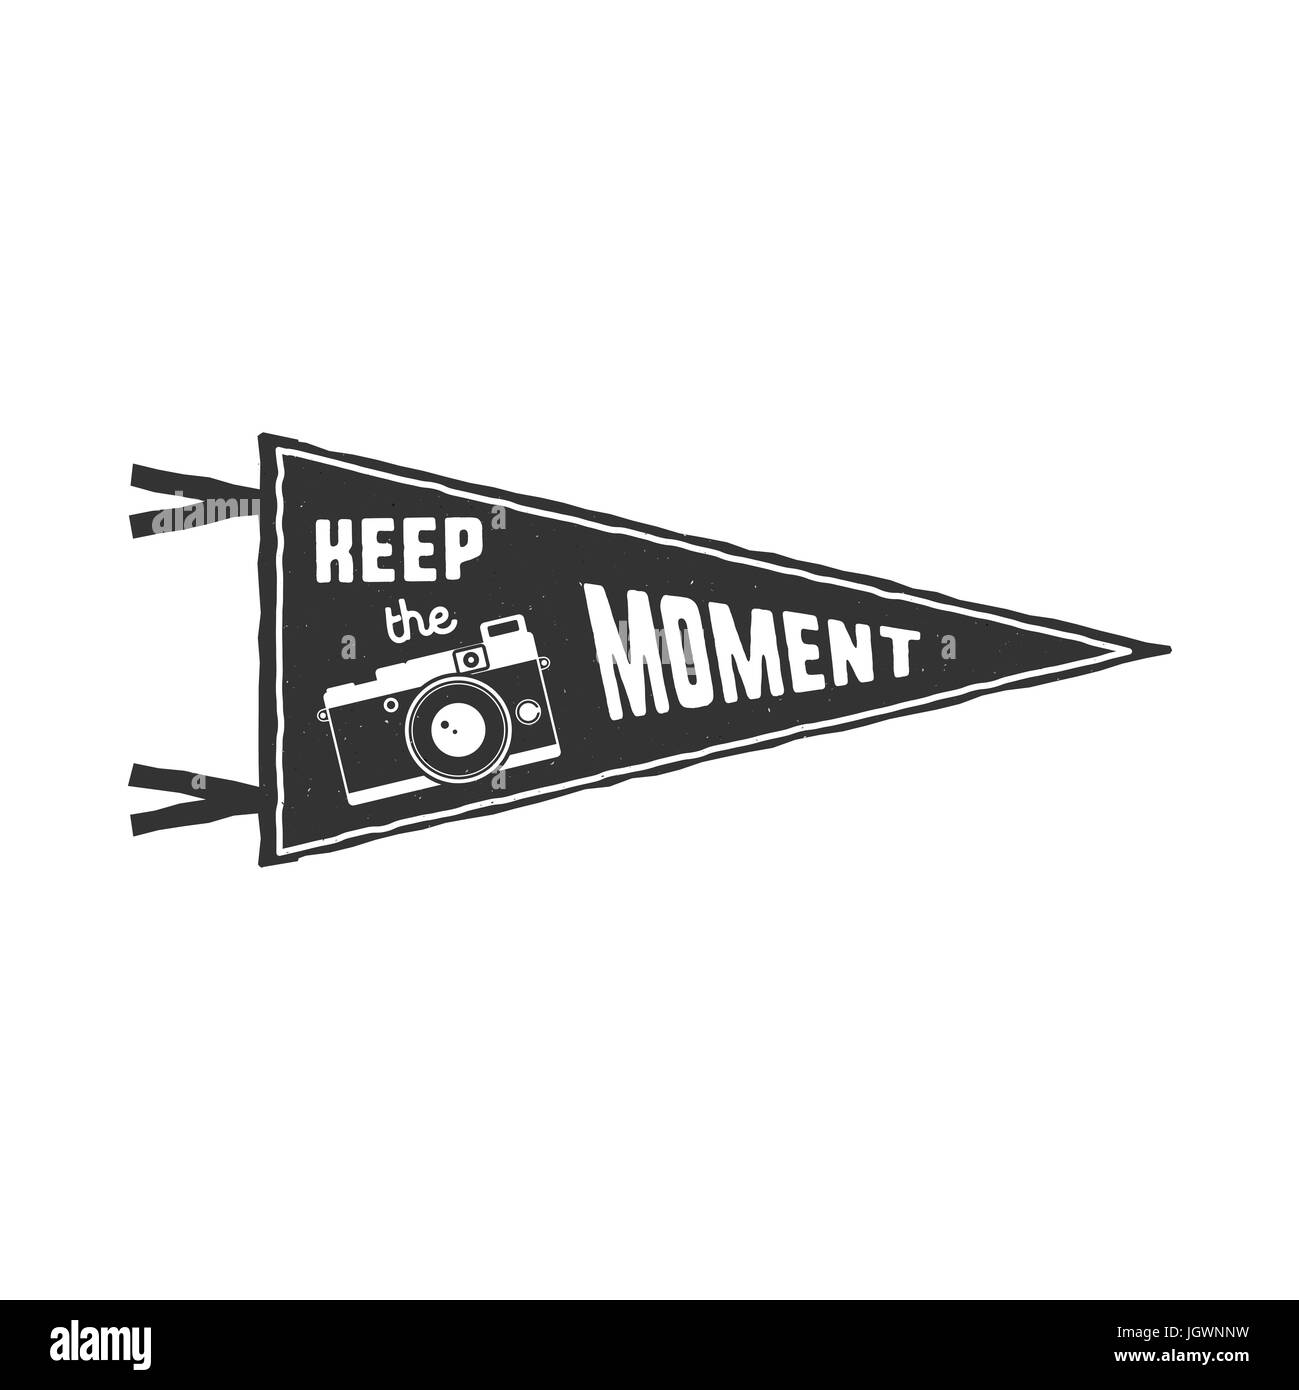 Keep the moment pennant. Flag pendant design in retro monochrome style. Drawing for prints on t-shirts, mugs and other branding identity. Stock illustration Stock Photo